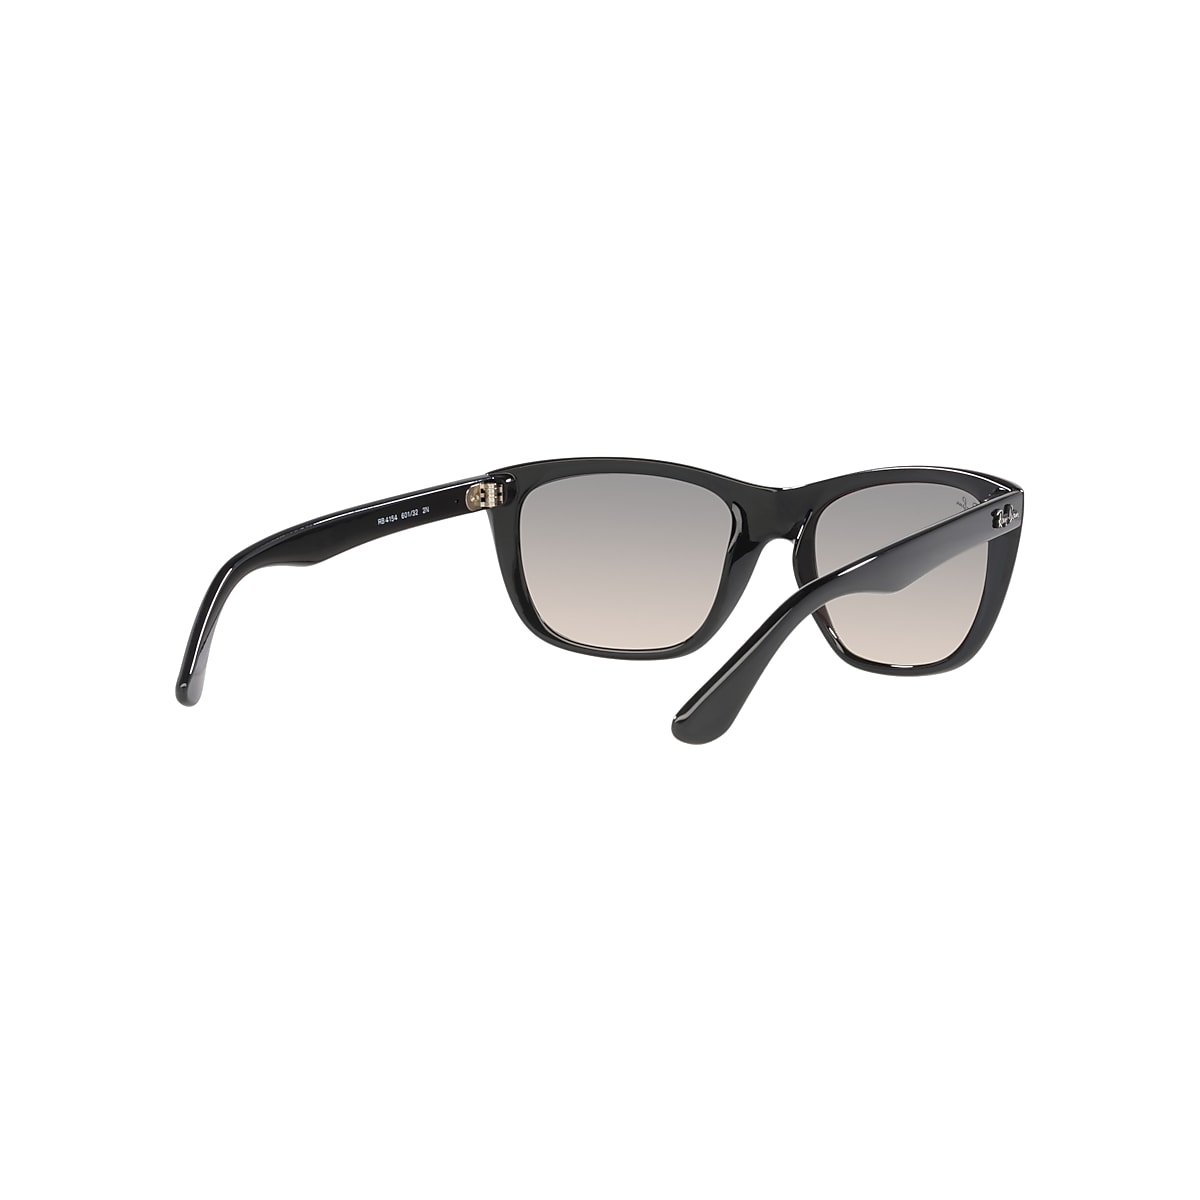 RB4154 Sunglasses in Black and Grey - RB4154 | Ray-Ban® US